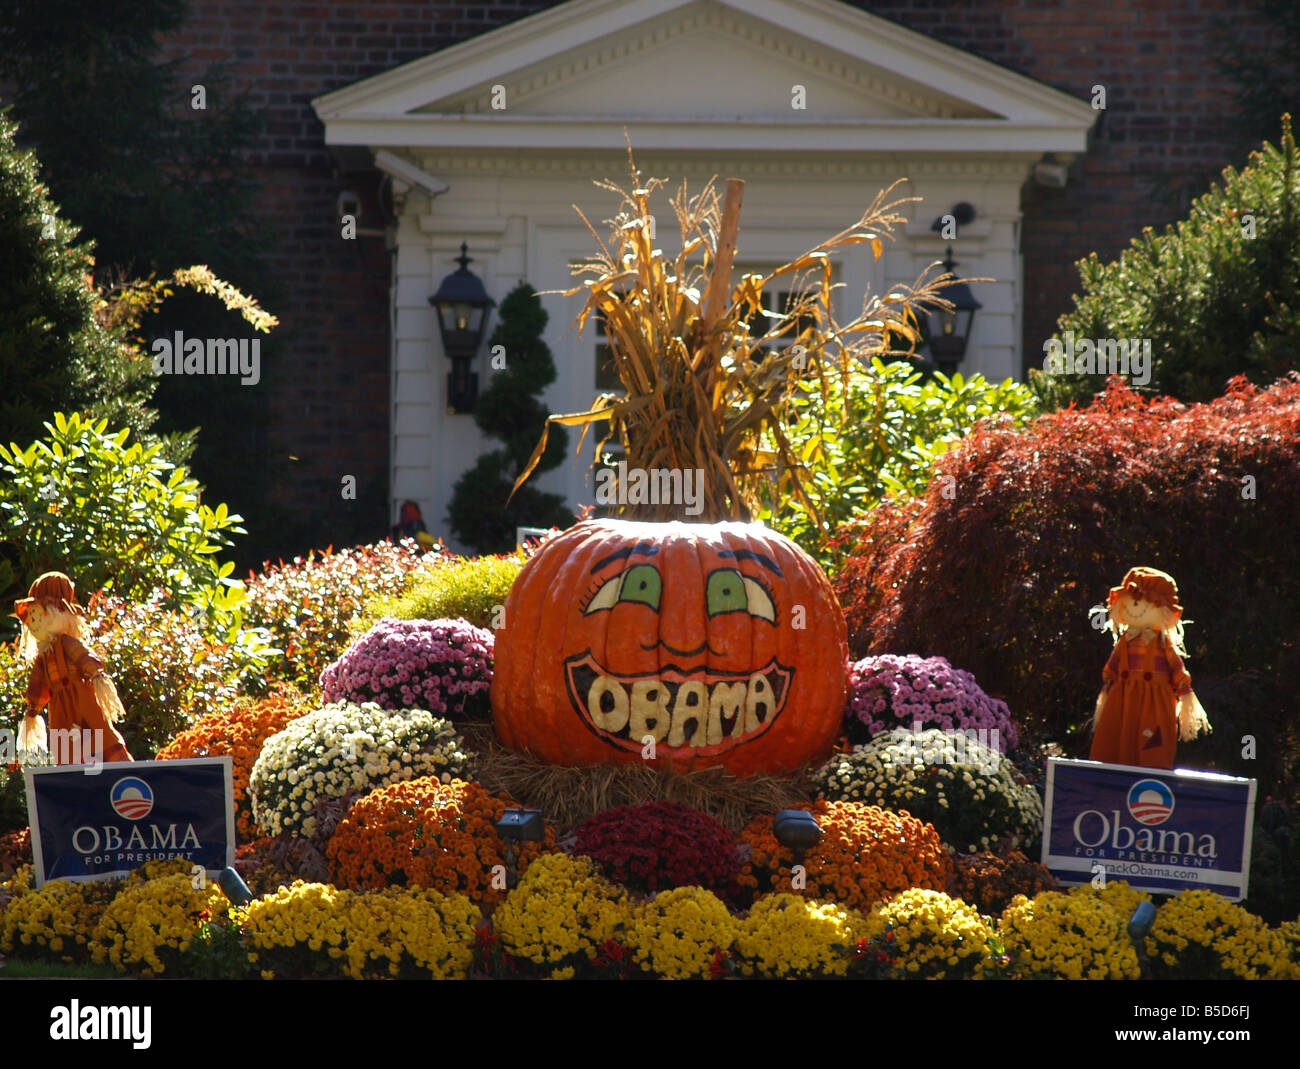 Autumn decorations incorporate support for Barack Obama. Stock Photo